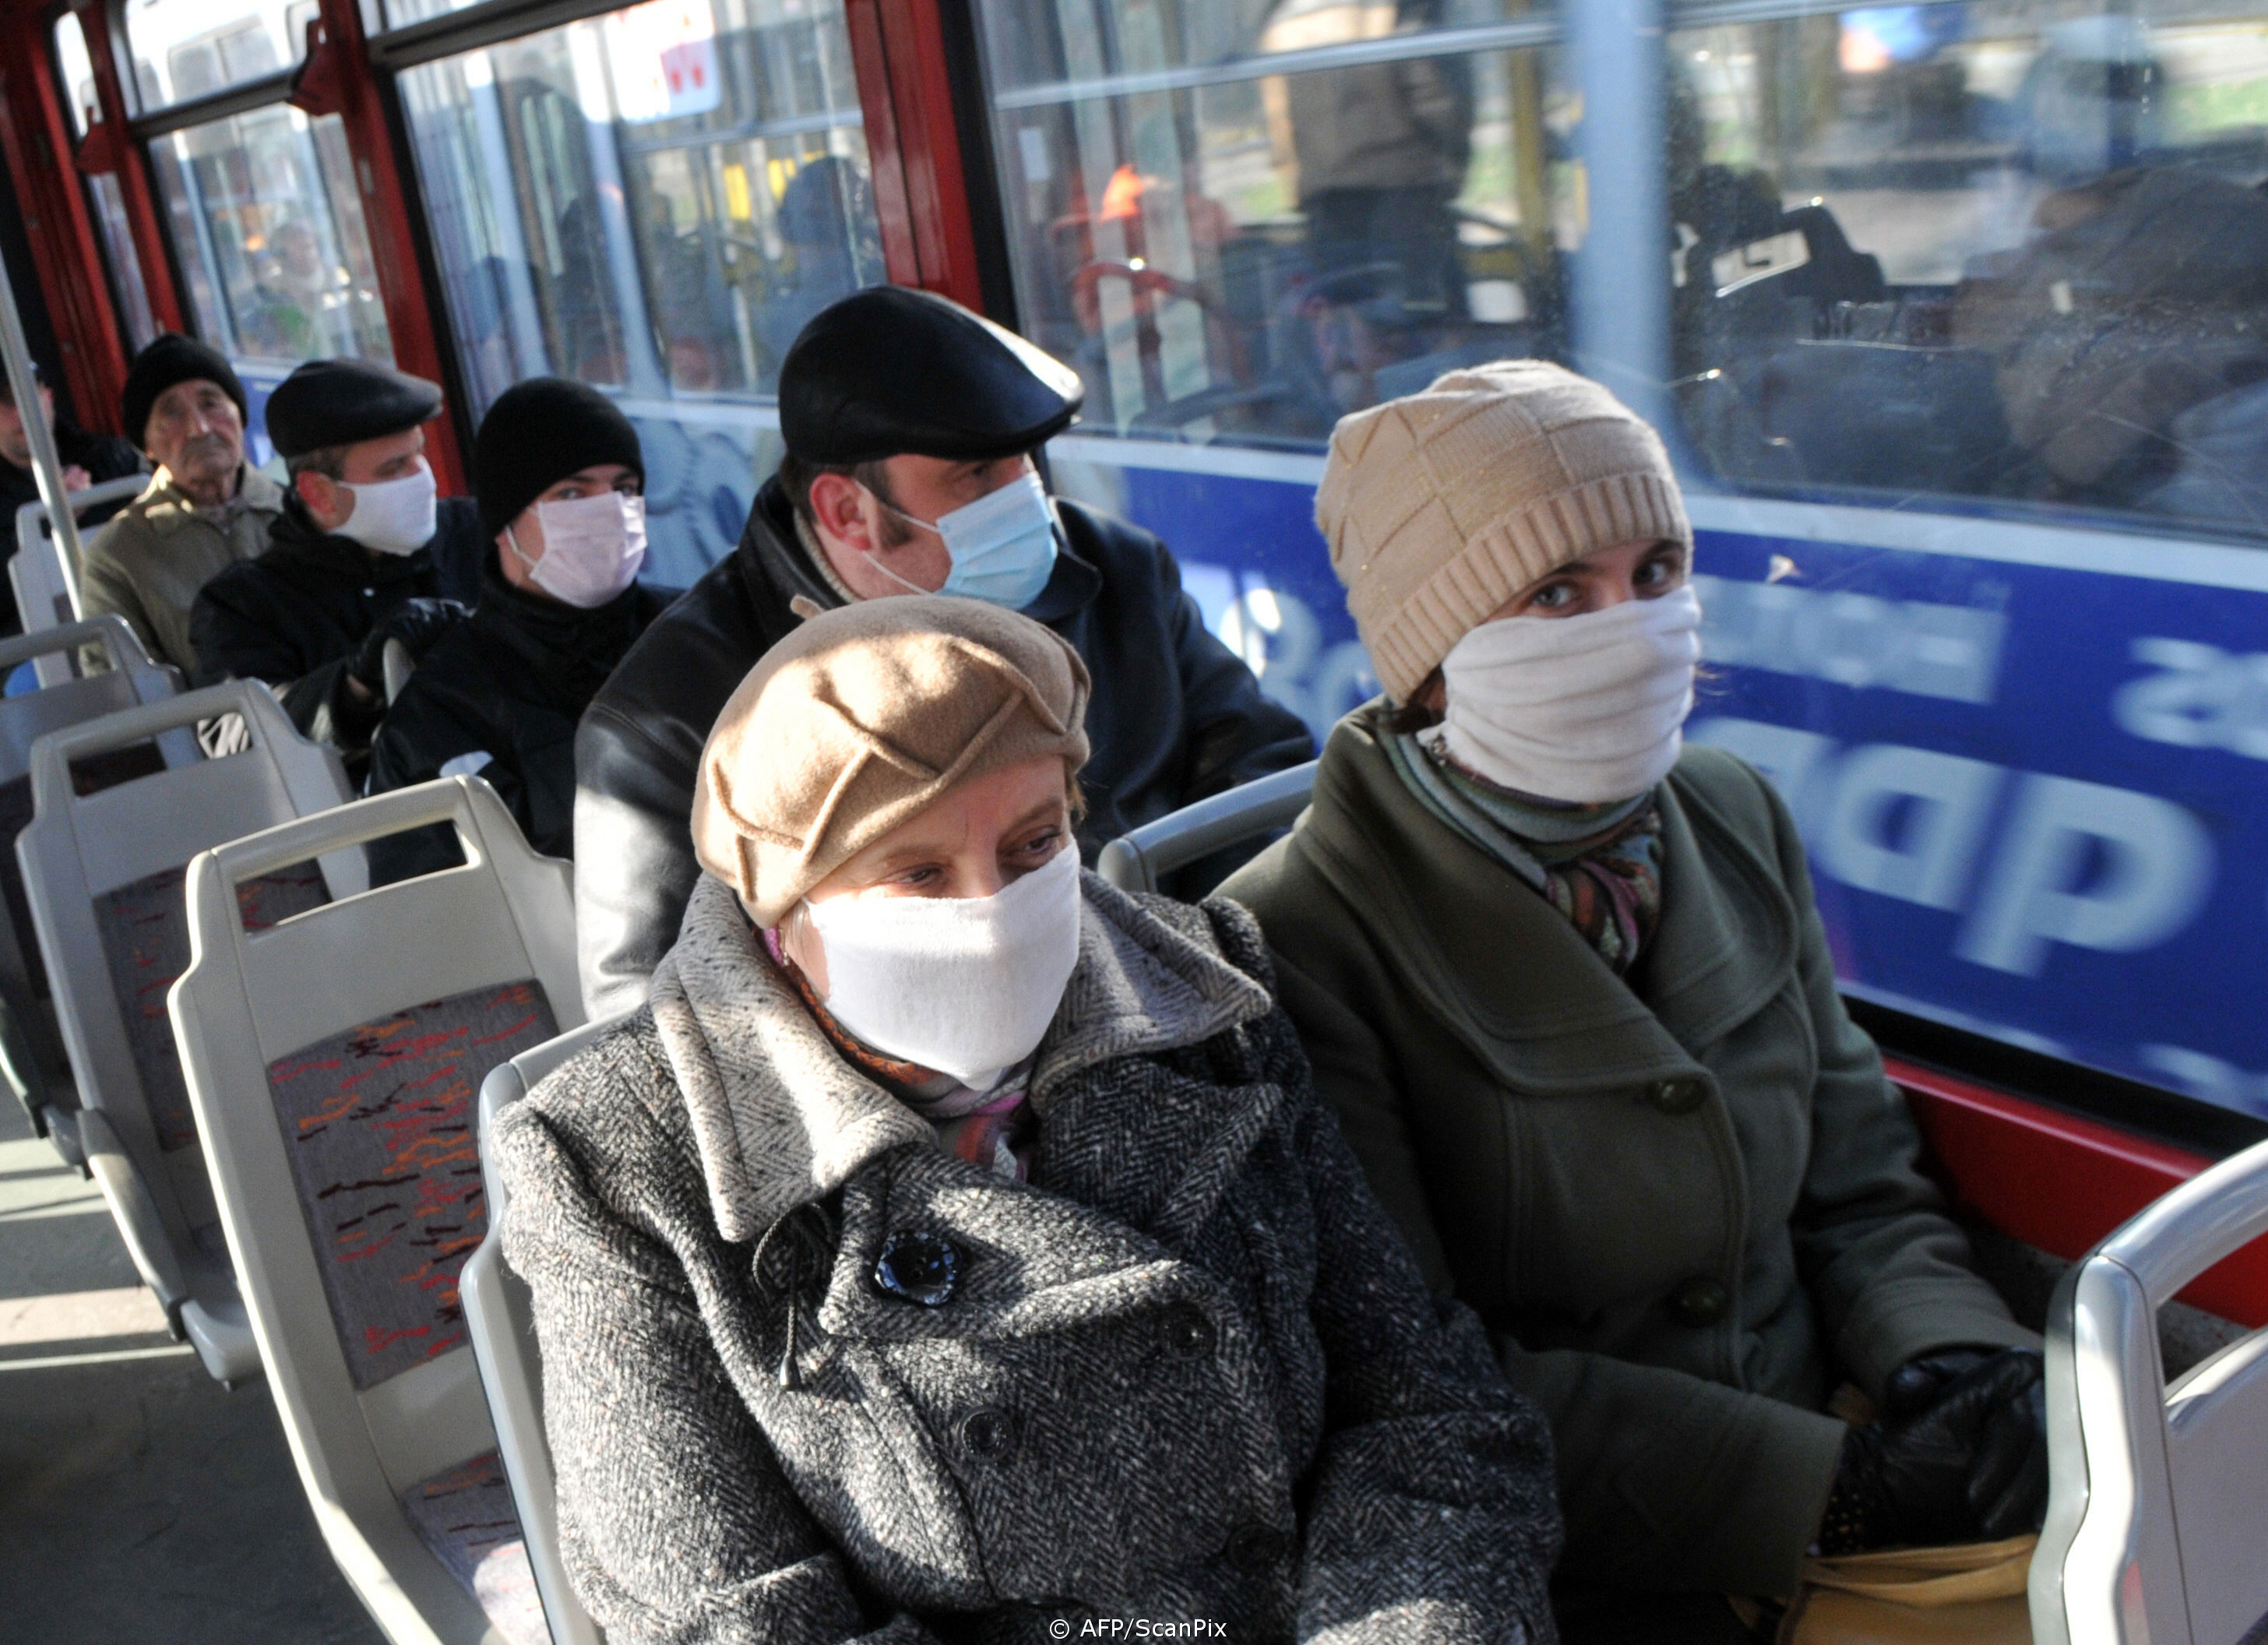 People wear protective masks as they ride the tram in the western Ukrainian city of Lviv on November 3, 2009. The Ukrainian health ministry raised on November 2 the death toll from the flu and respiratory problems to 67 on November 2, without detailing when the deaths took place or explaining the jump in the toll. AFP PHOTO/YURIY DYACHYSHYN